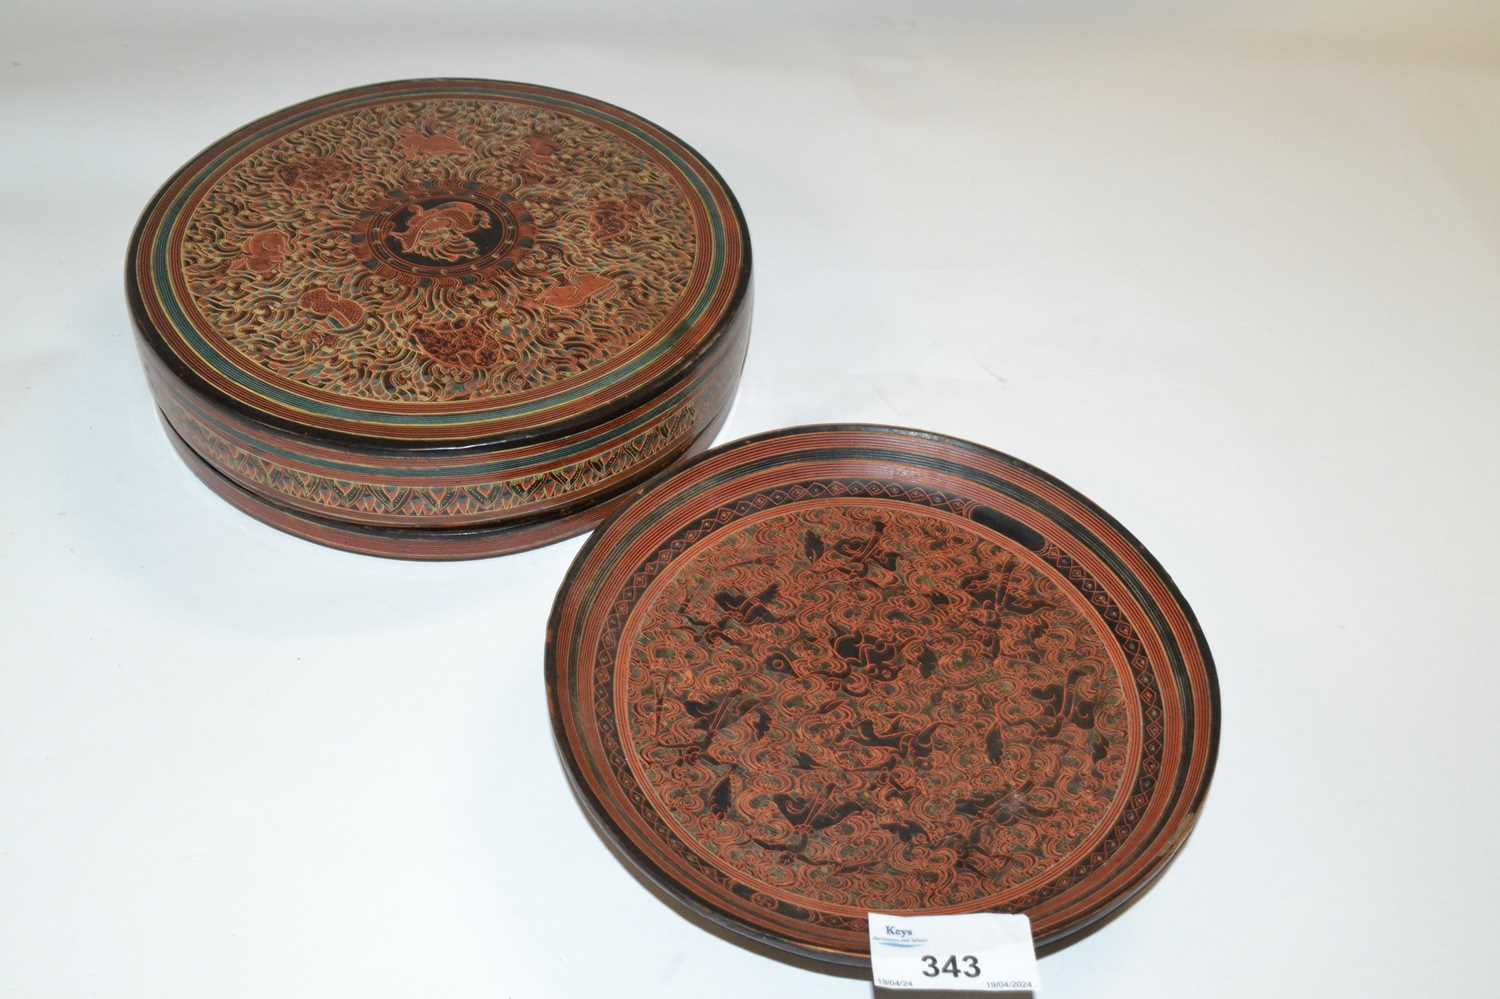 A lacquer box and cover, the interior with a series of small trays and dividers with a scrolling